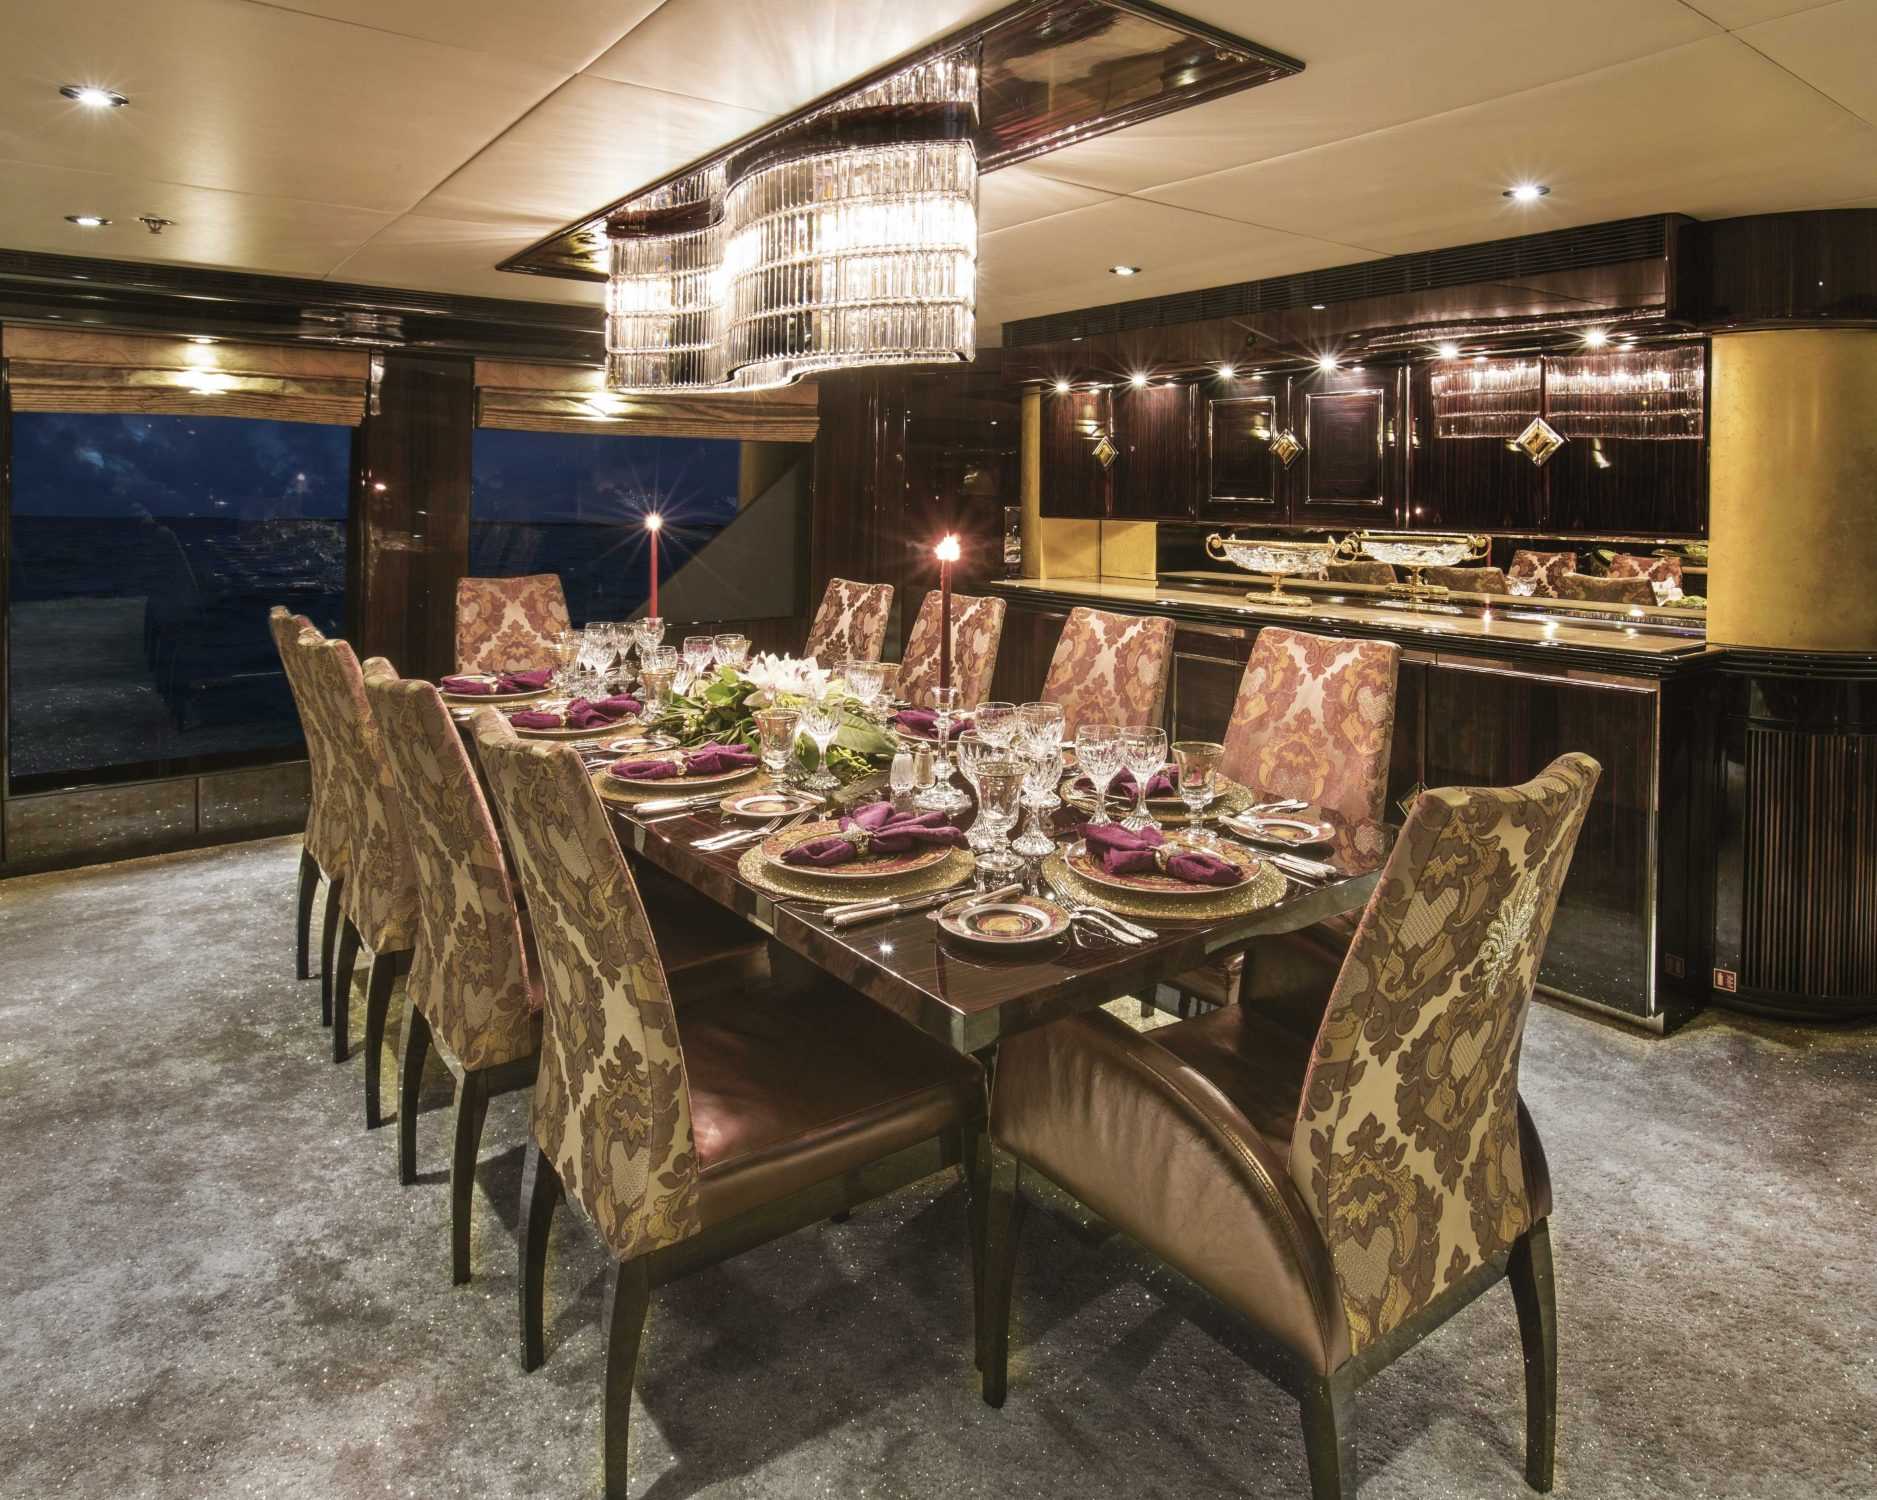 43m Yacht LADY BEE 6631 106 - Karen Lynn Interiors - Interior Design for Yacht, Aircrafts and Residential Projects